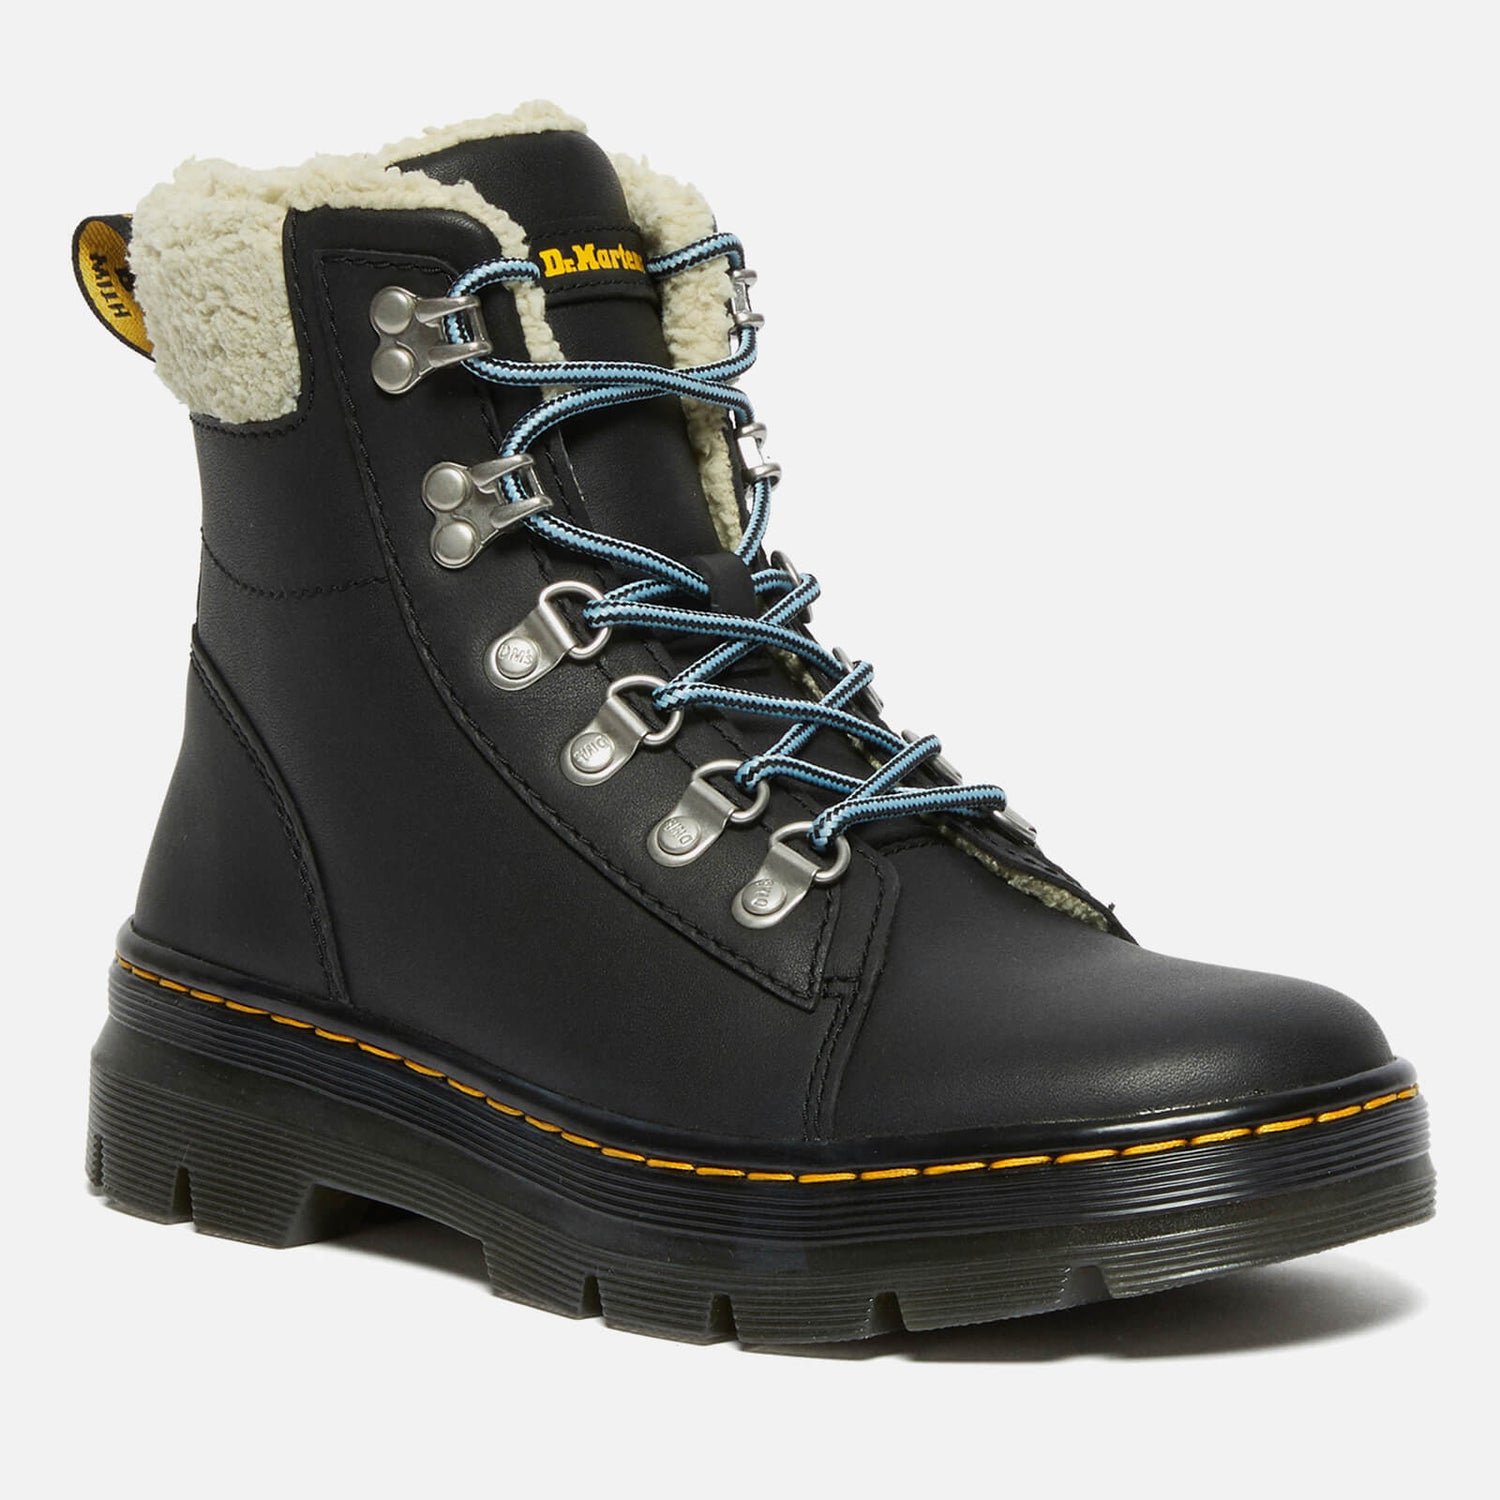 Dr. Martens Combs Tech Faux Fur-Lined Leather Hiking Boots - UK 3